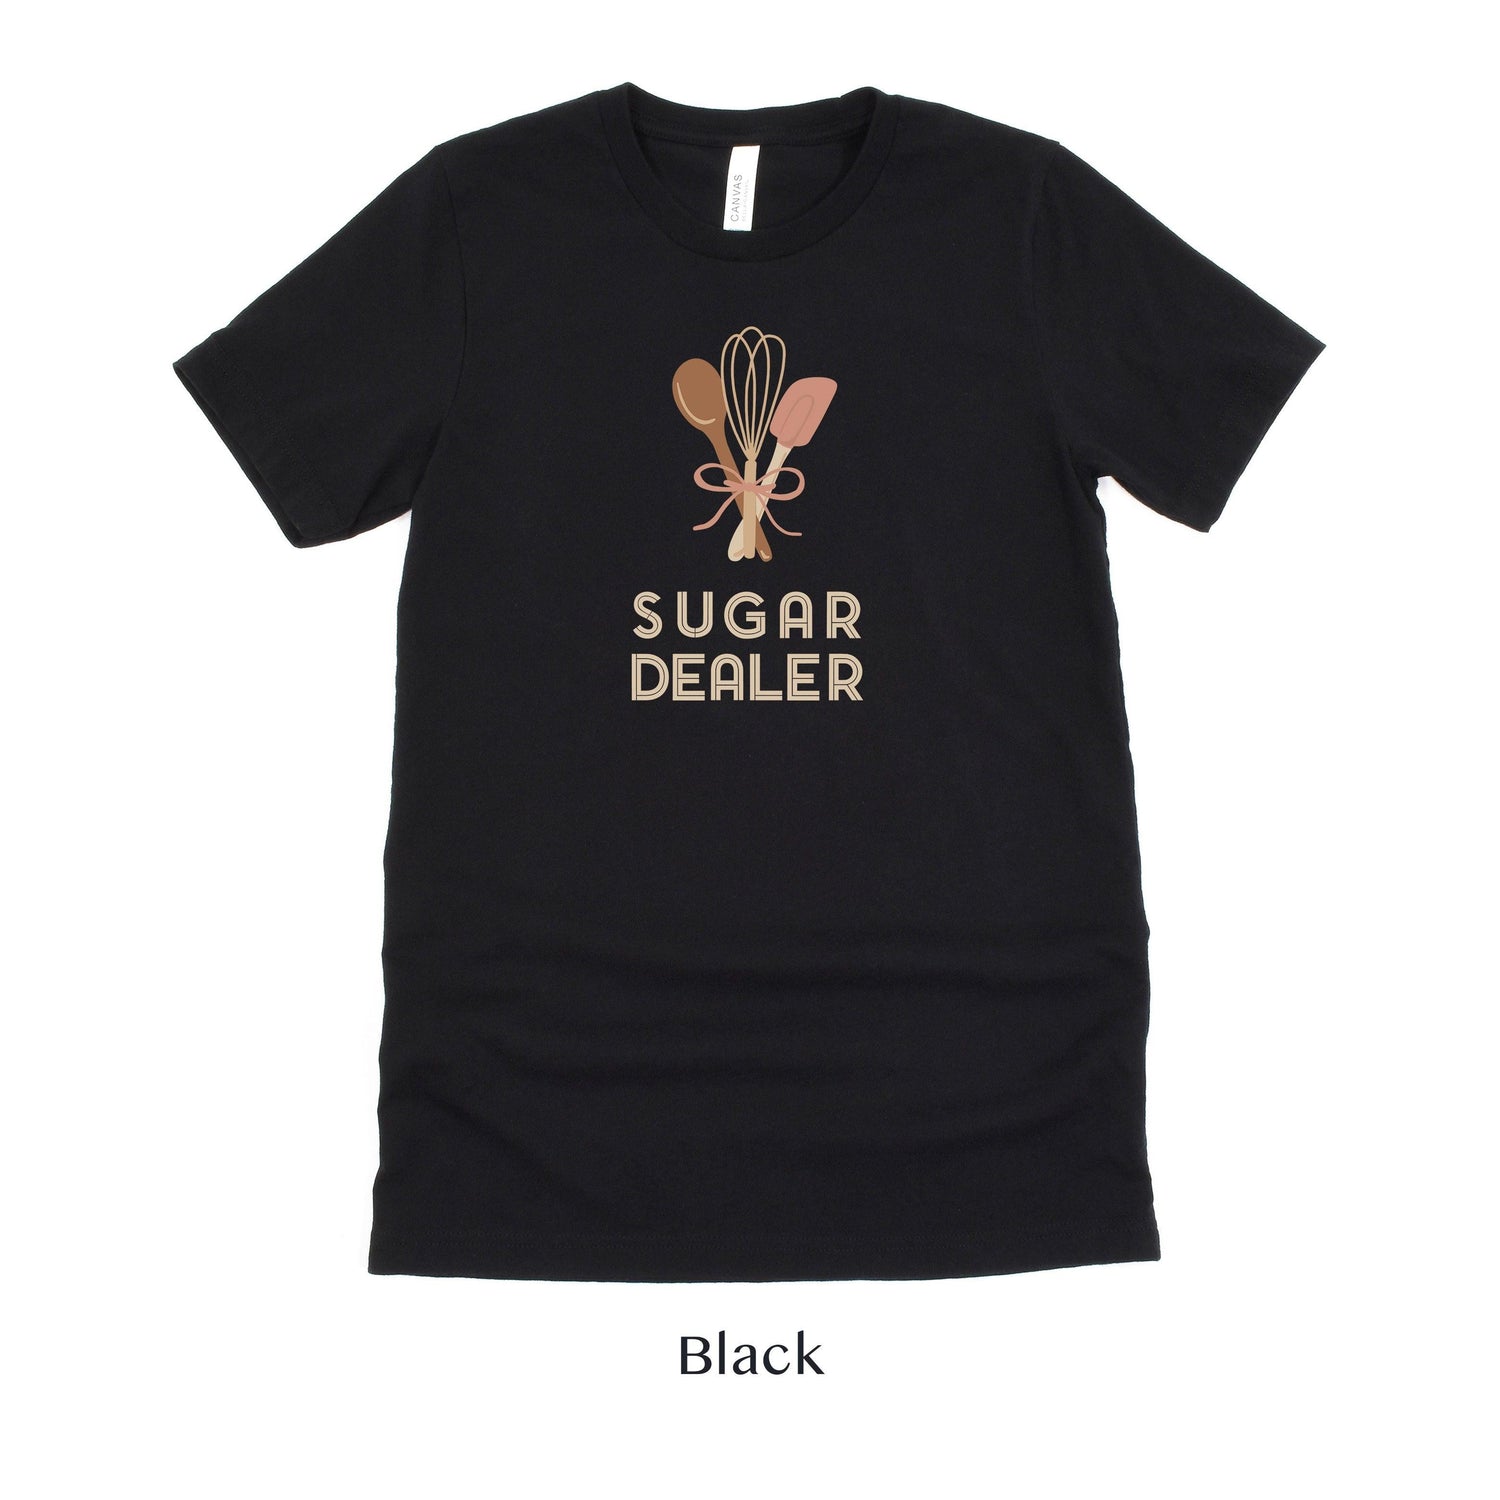 Sugar Dealer Cake or Cookie Baker - Cute Team Shirts for Bakery Unisex - Wedding Vendor Professional - Pastry Chef by Oaklynn Lane